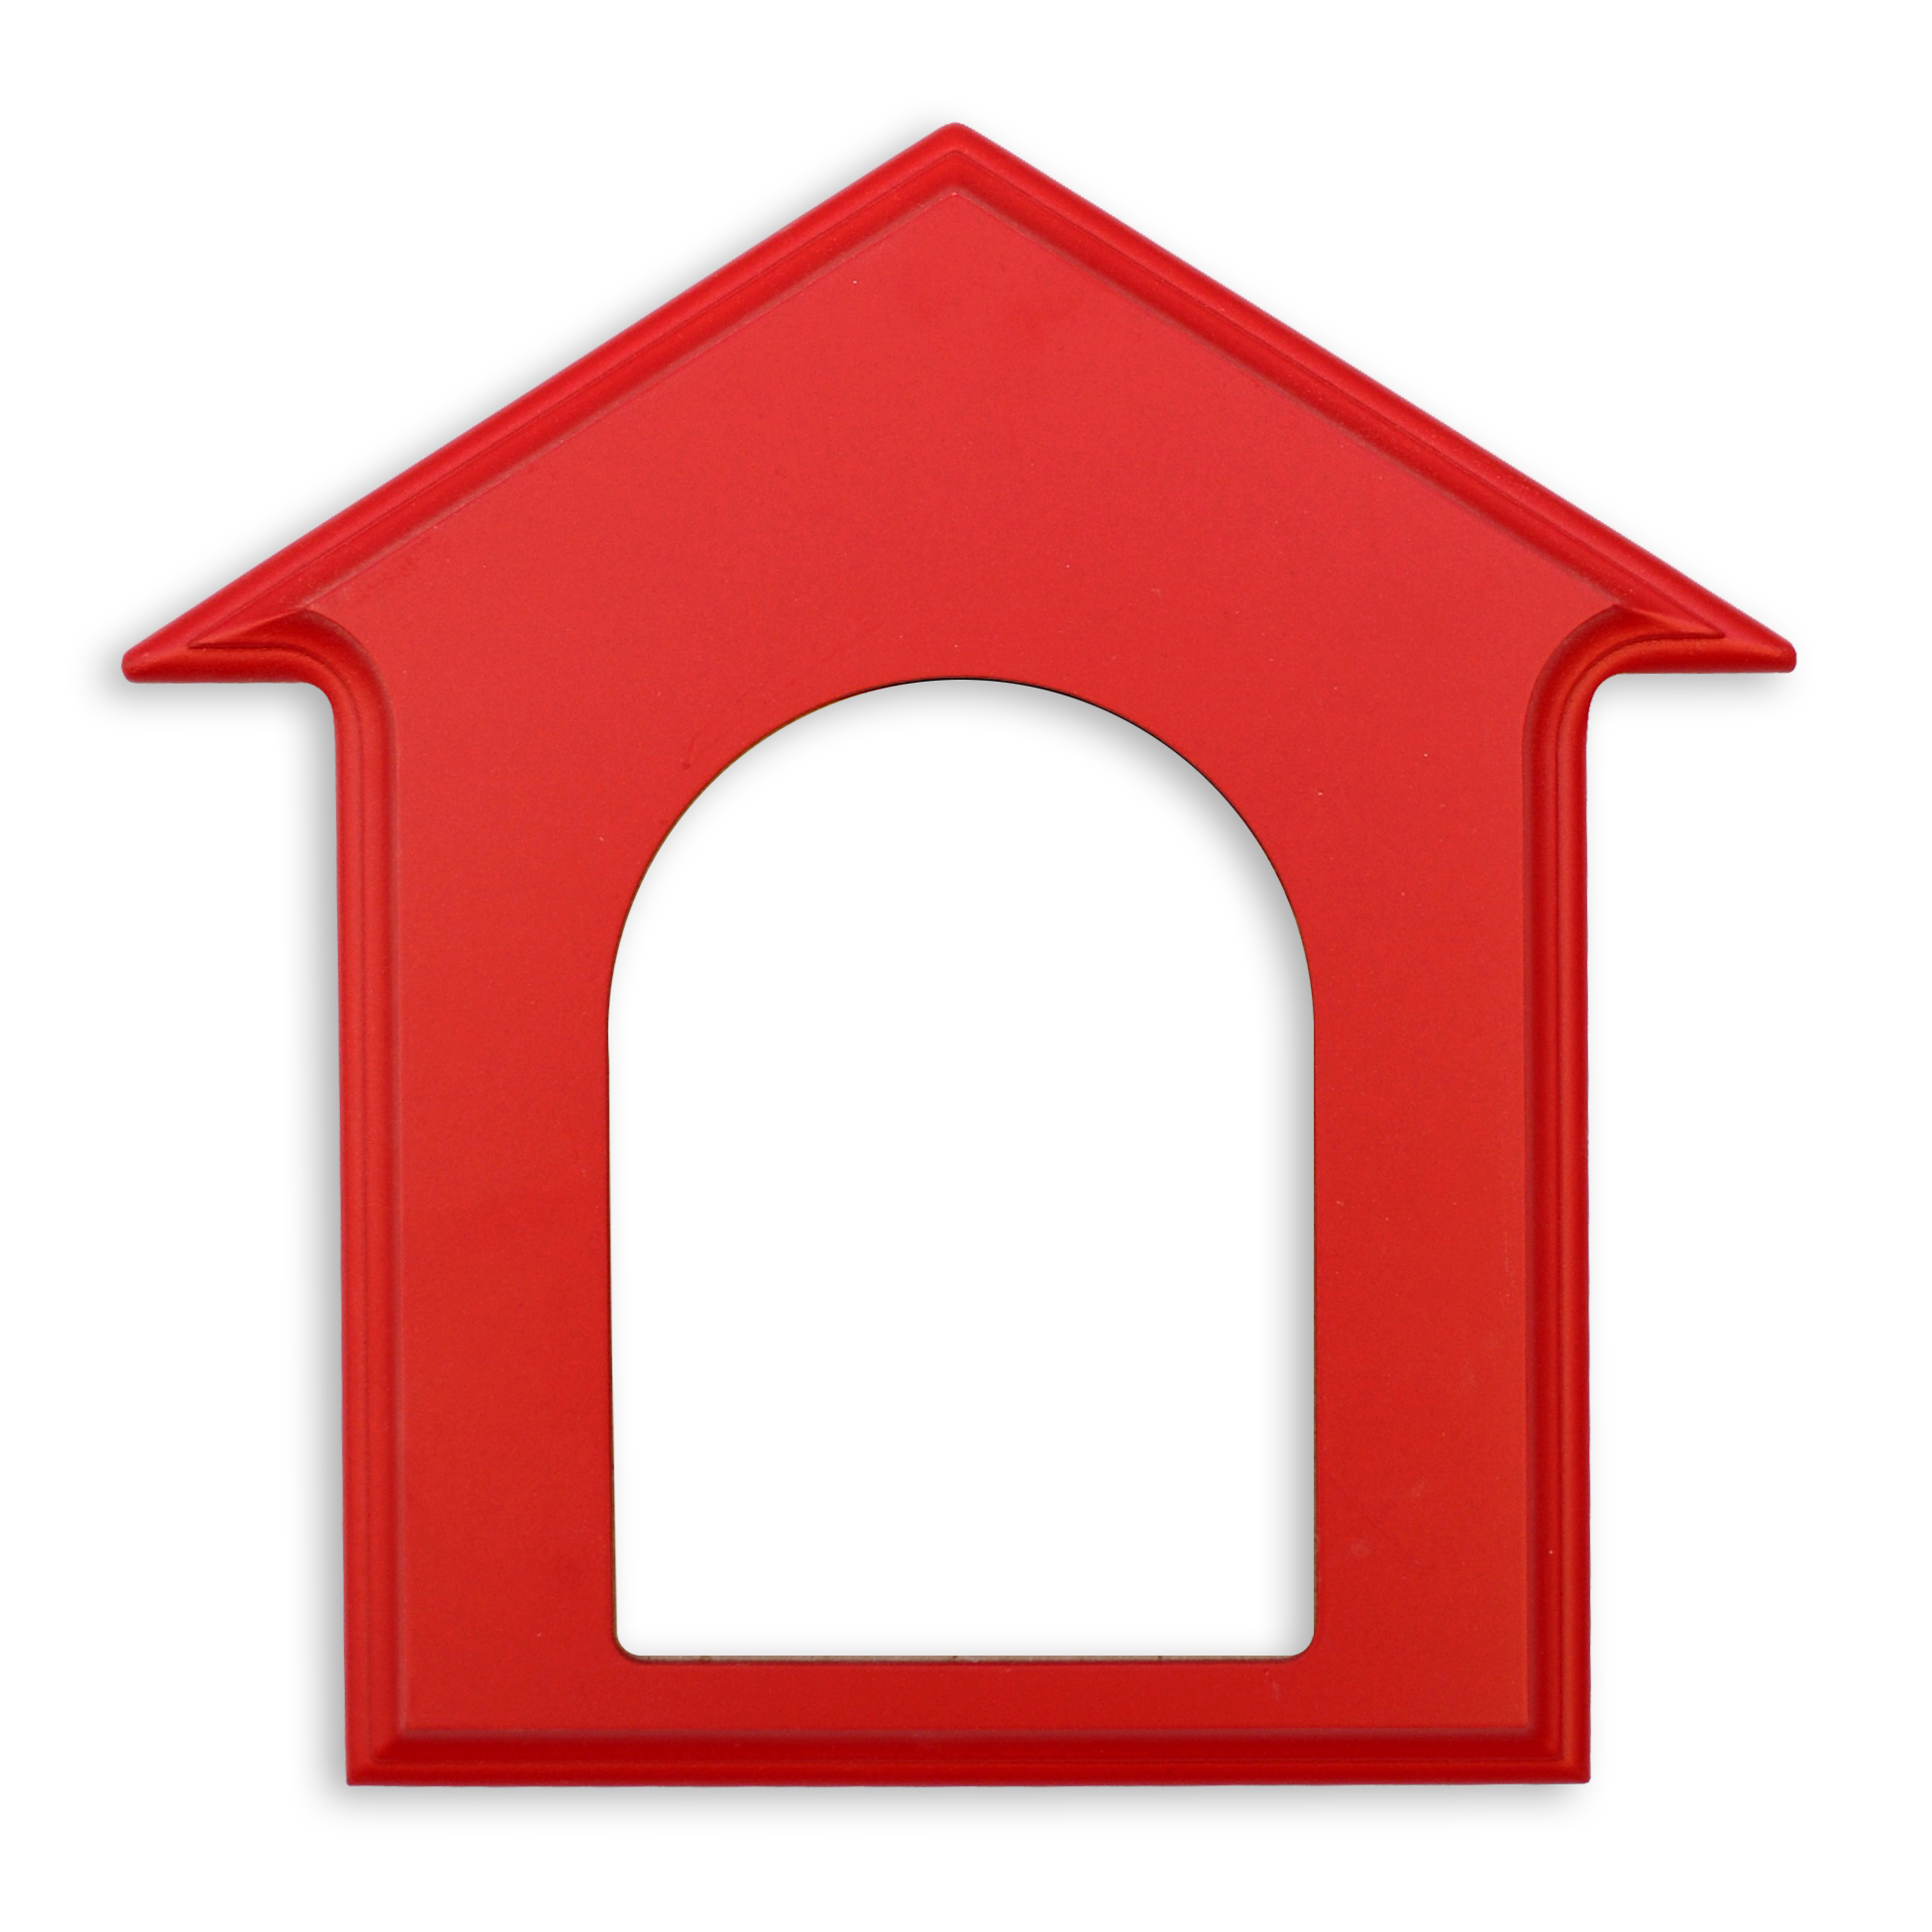 Image of Dog House Clipart #10393, Red Dog House Clip Art ...